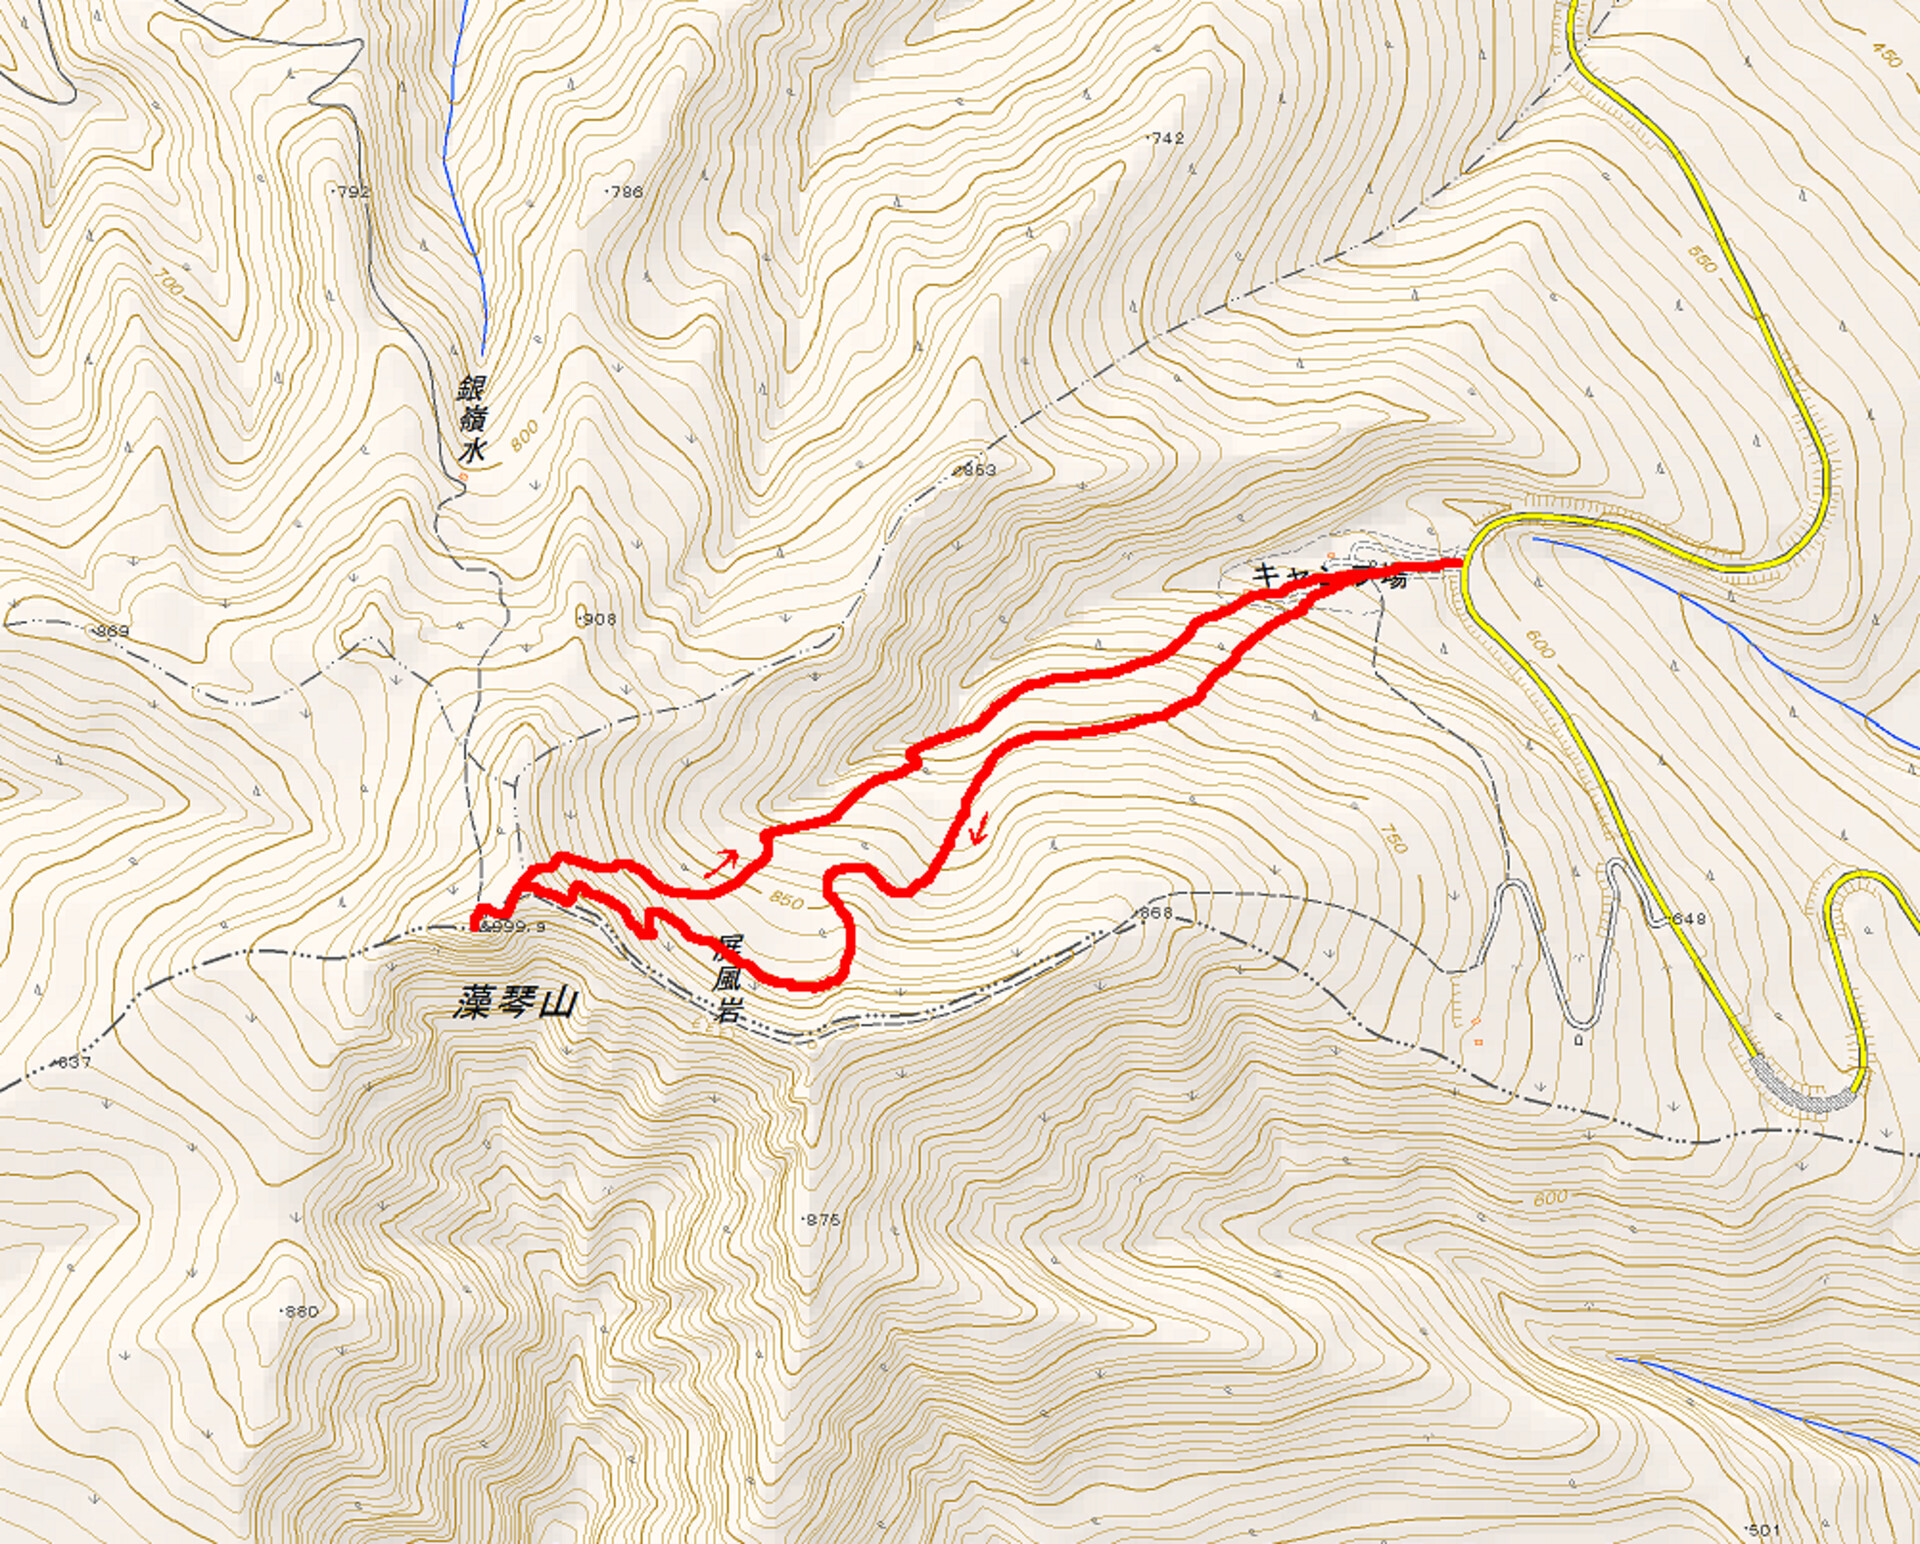 A map of my route up and back down Mokoto-yama